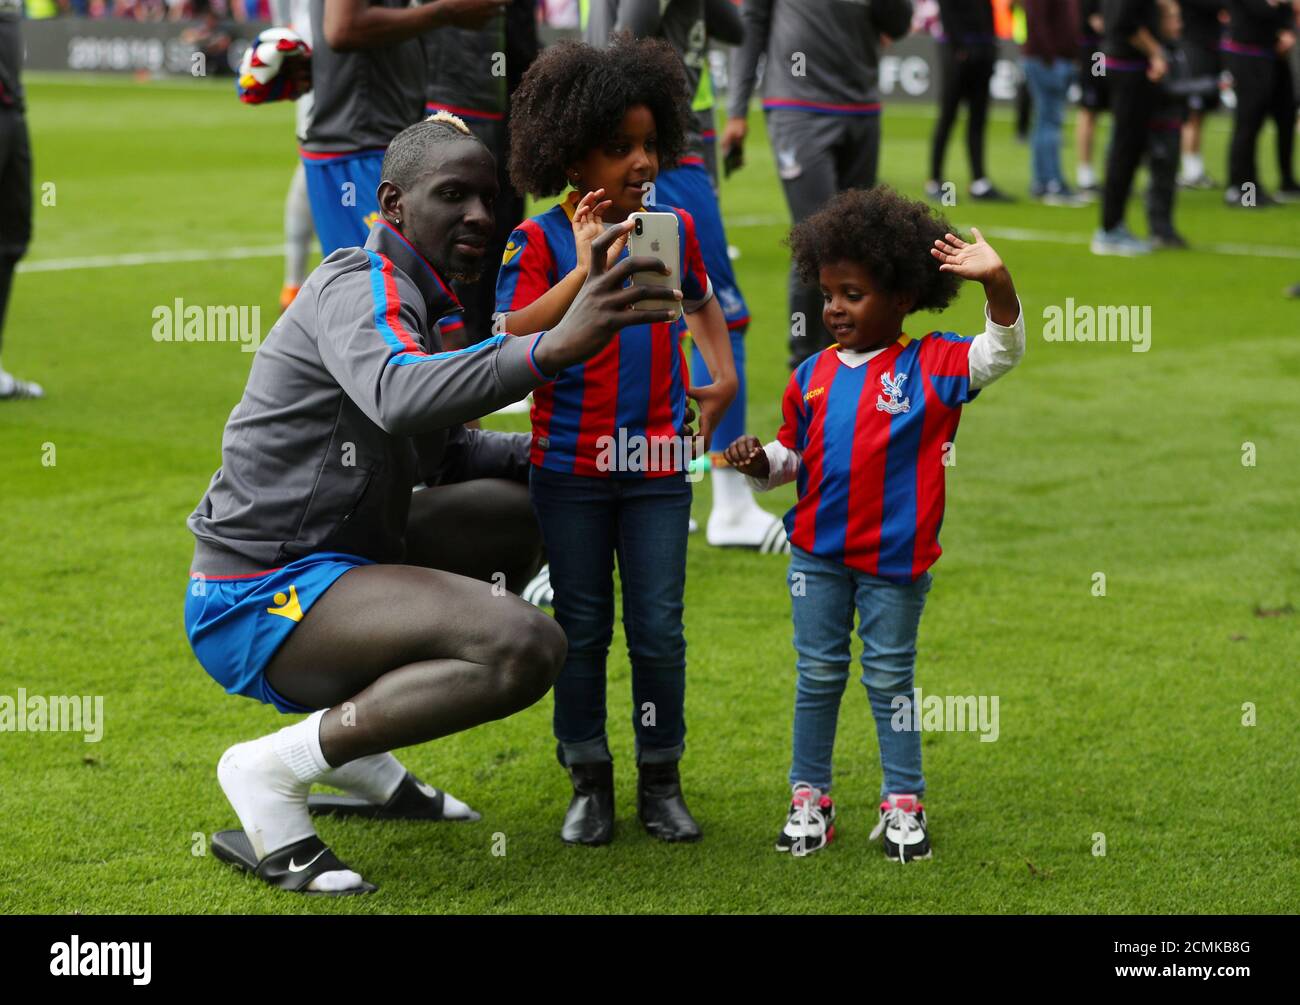 Soccer Football - Premier League - Crystal Palace vs West Bromwich Albion - Selhurst Park, London, Britain - May 13, 2018   Crystal Palace's Mamadou Sakho with children after the match   REUTERS/Hannah McKay    EDITORIAL USE ONLY. No use with unauthorized audio, video, data, fixture lists, club/league logos or 'live' services. Online in-match use limited to 75 images, no video emulation. No use in betting, games or single club/league/player publications.  Please contact your account representative for further details. Stock Photo